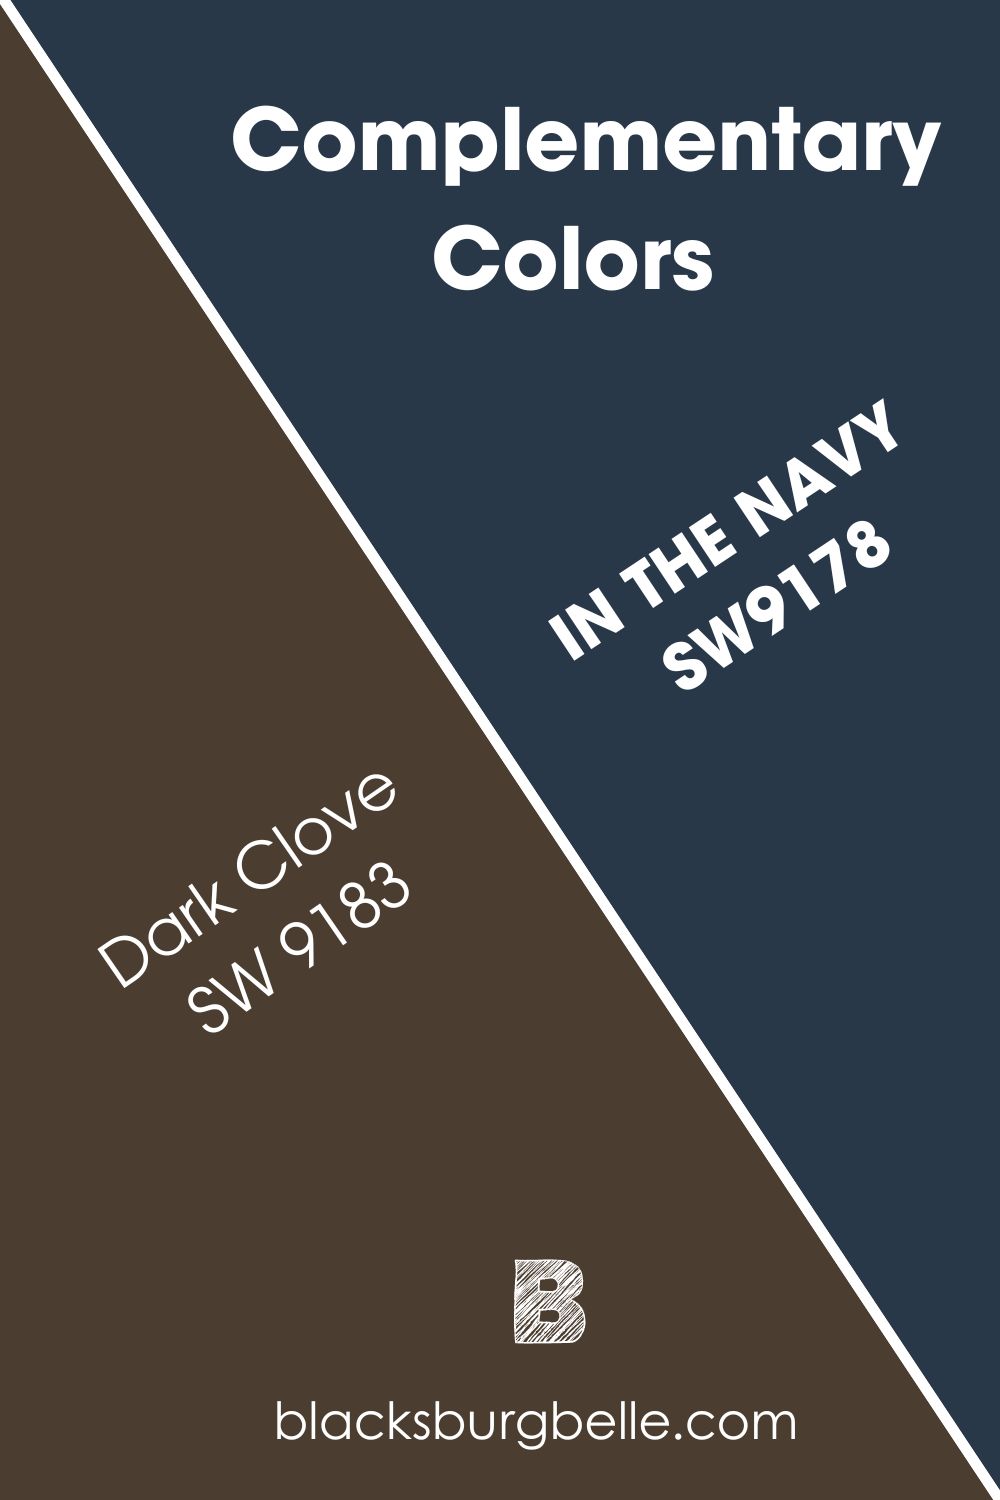 Complementary Colors for IN THE NAVY